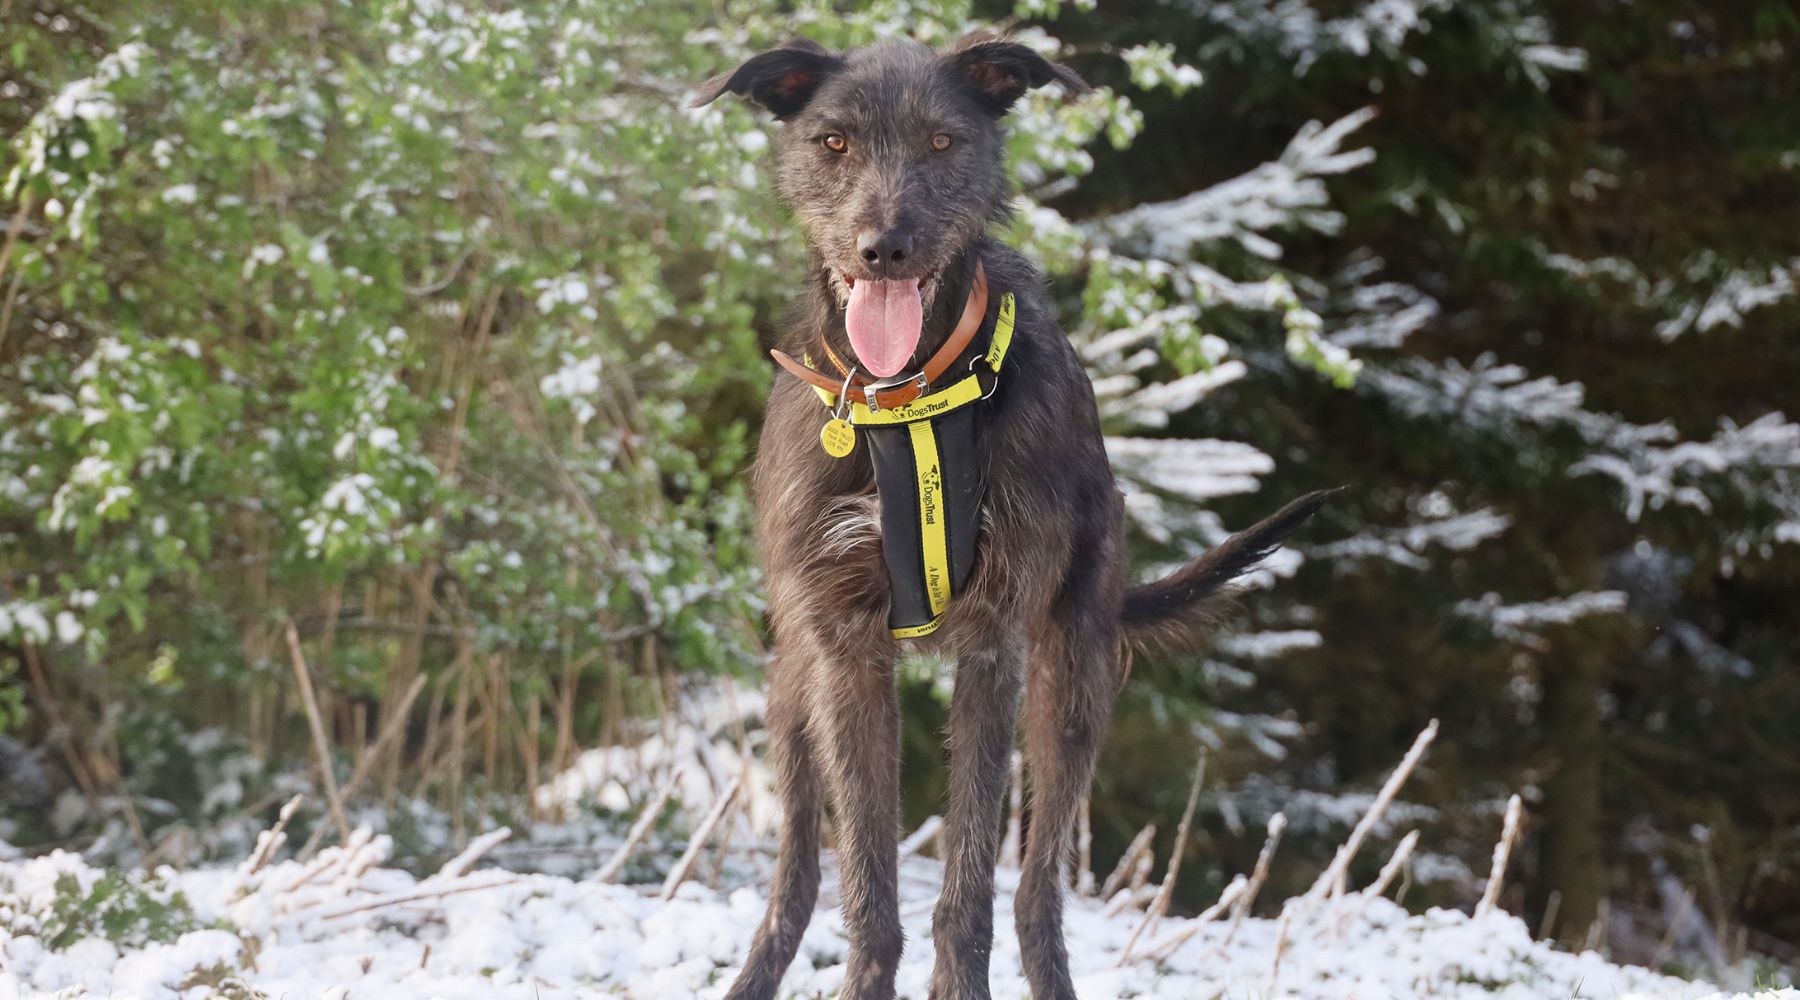 Omaze Million Pound House Trust - Dogs Trust - Raven's Story. A black lurcher stands in a snowy field with a yellow dogs trust collar on